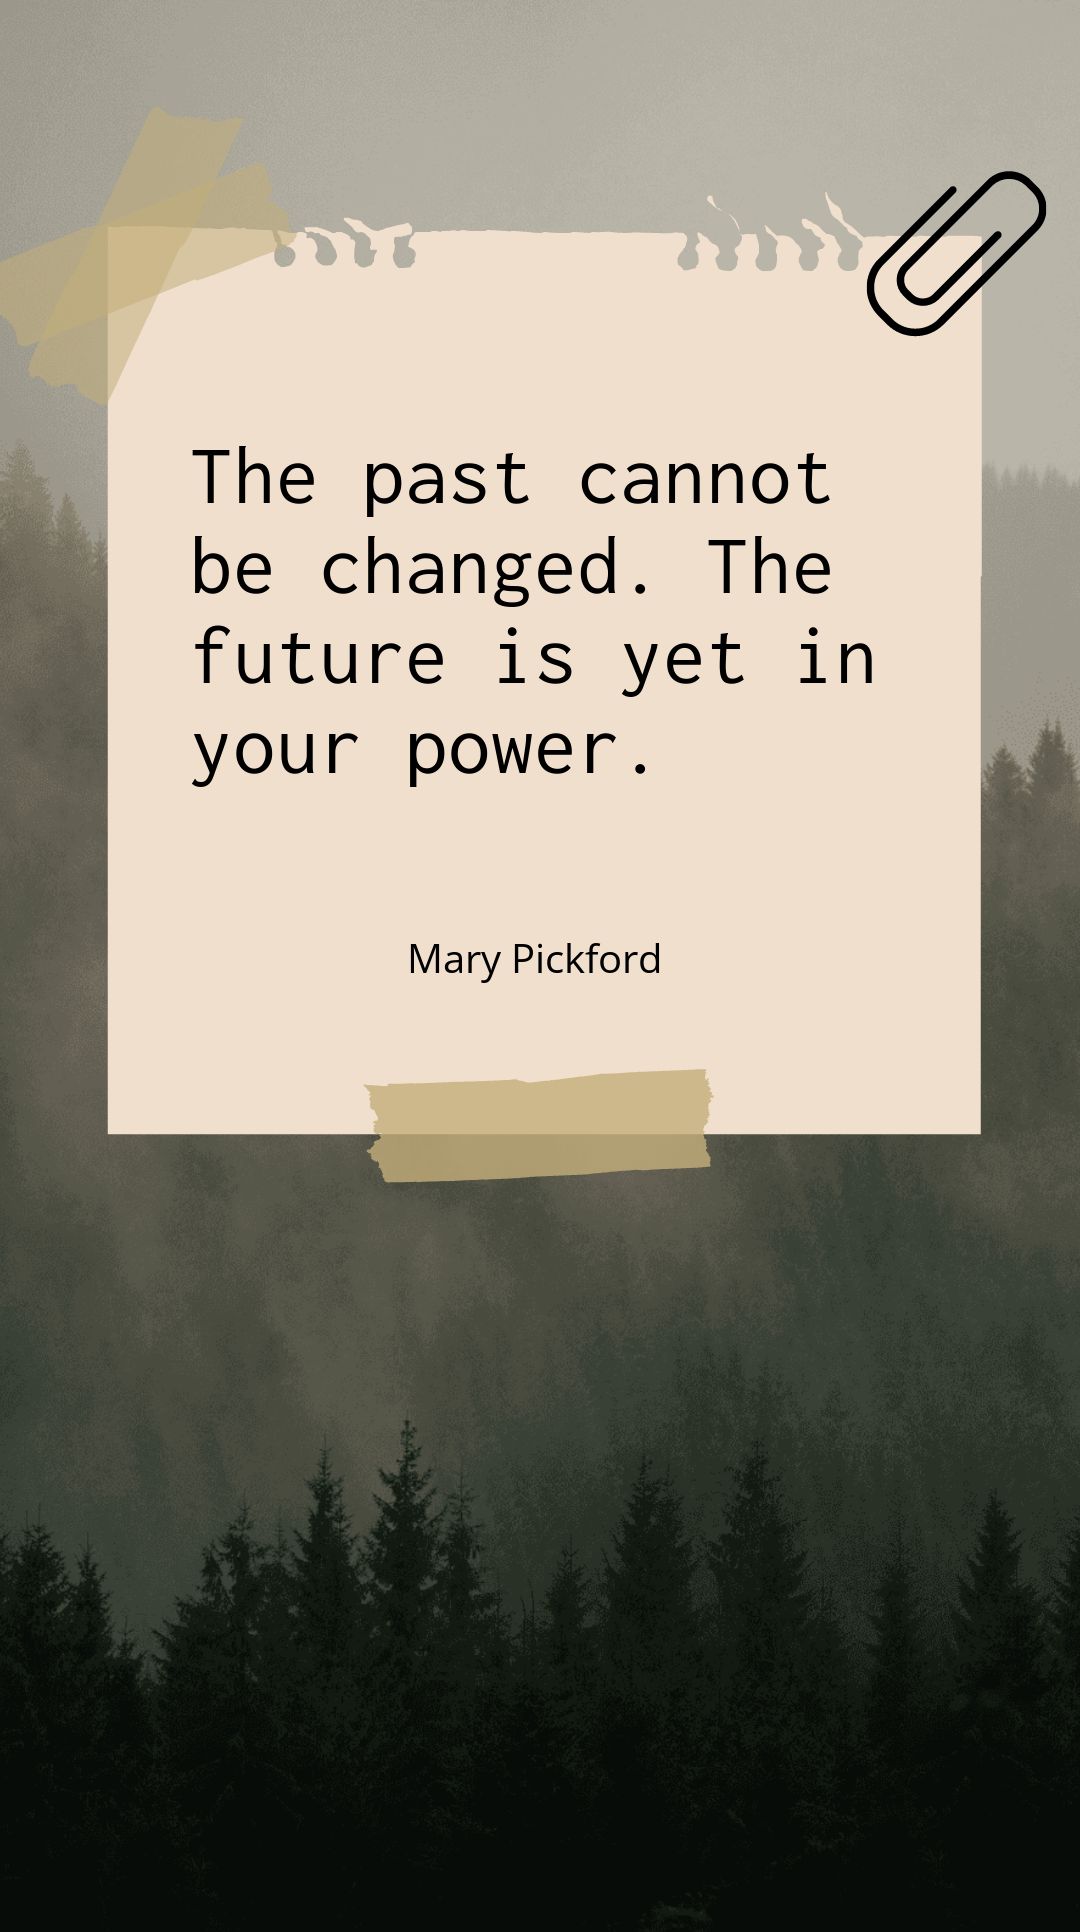 Mary Pickford - The past cannot be changed. The future is yet in your power.